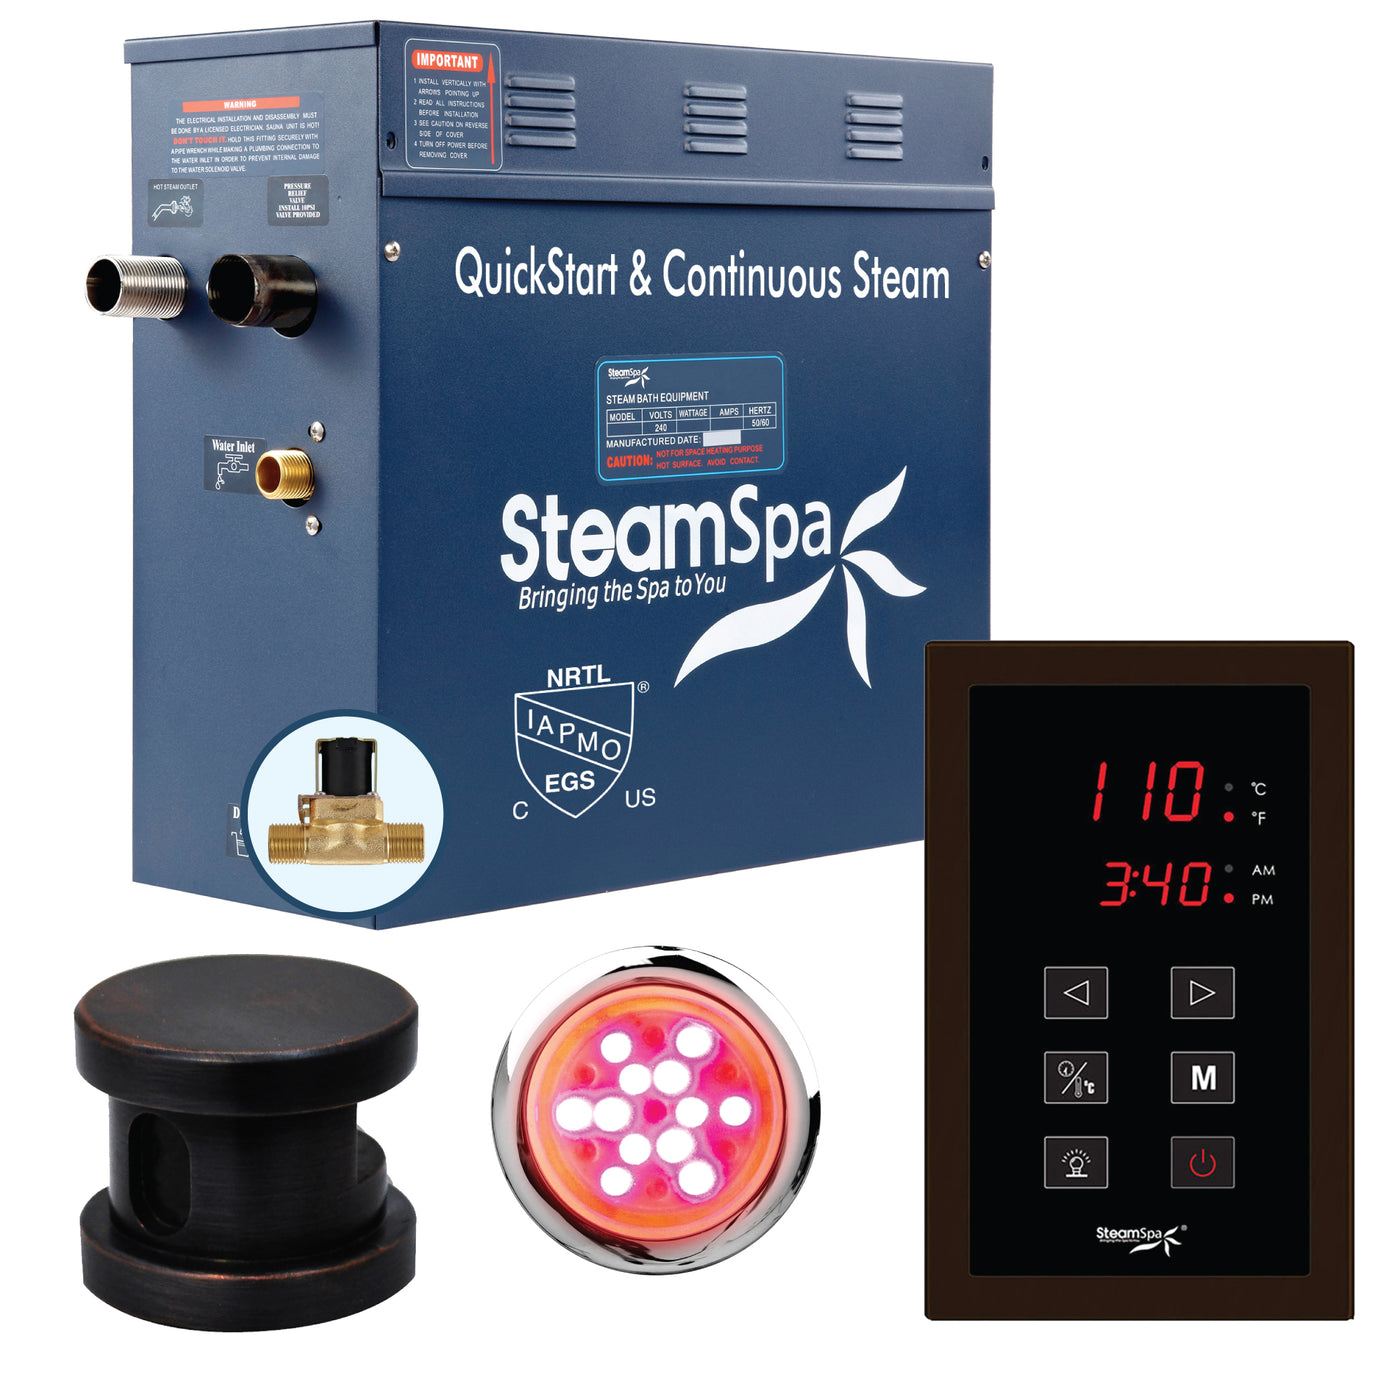 Steamspa Sentry Series 9KW QUICKSTART Steam Bath Generator Package in Oil Rubbed Bronze | Luxury Sauna Home Bath Steam Generator for Shower with Touch Screen, Steamhead, Built-in Auto Drain, and Chroma Light | SNT900ORB-A